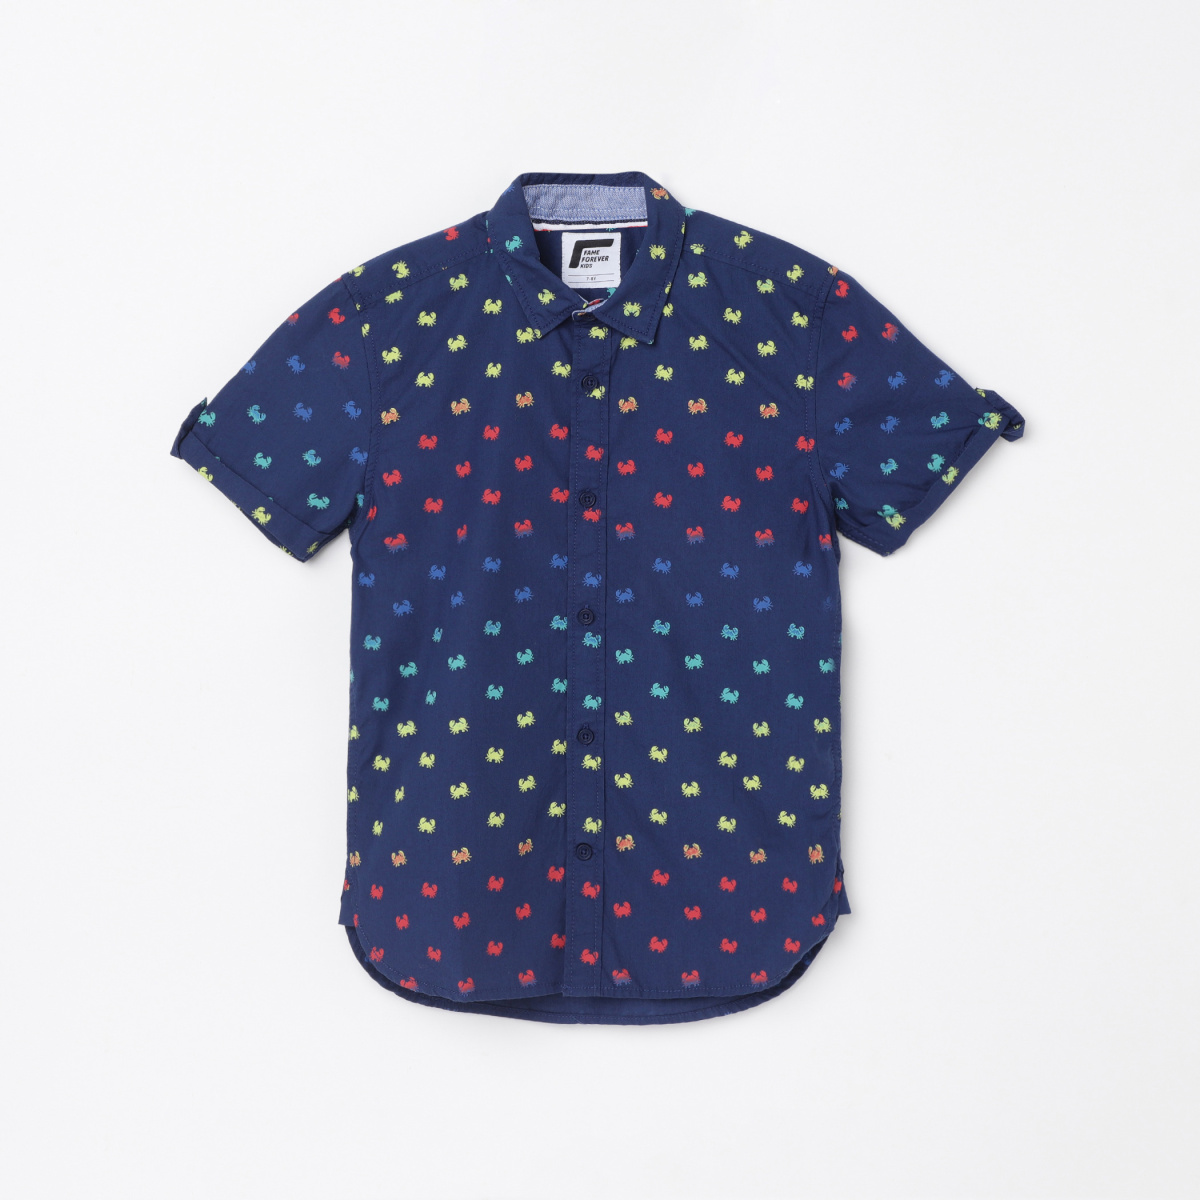 FAME FOREVER KIDS Boys Printed Casual Shirt